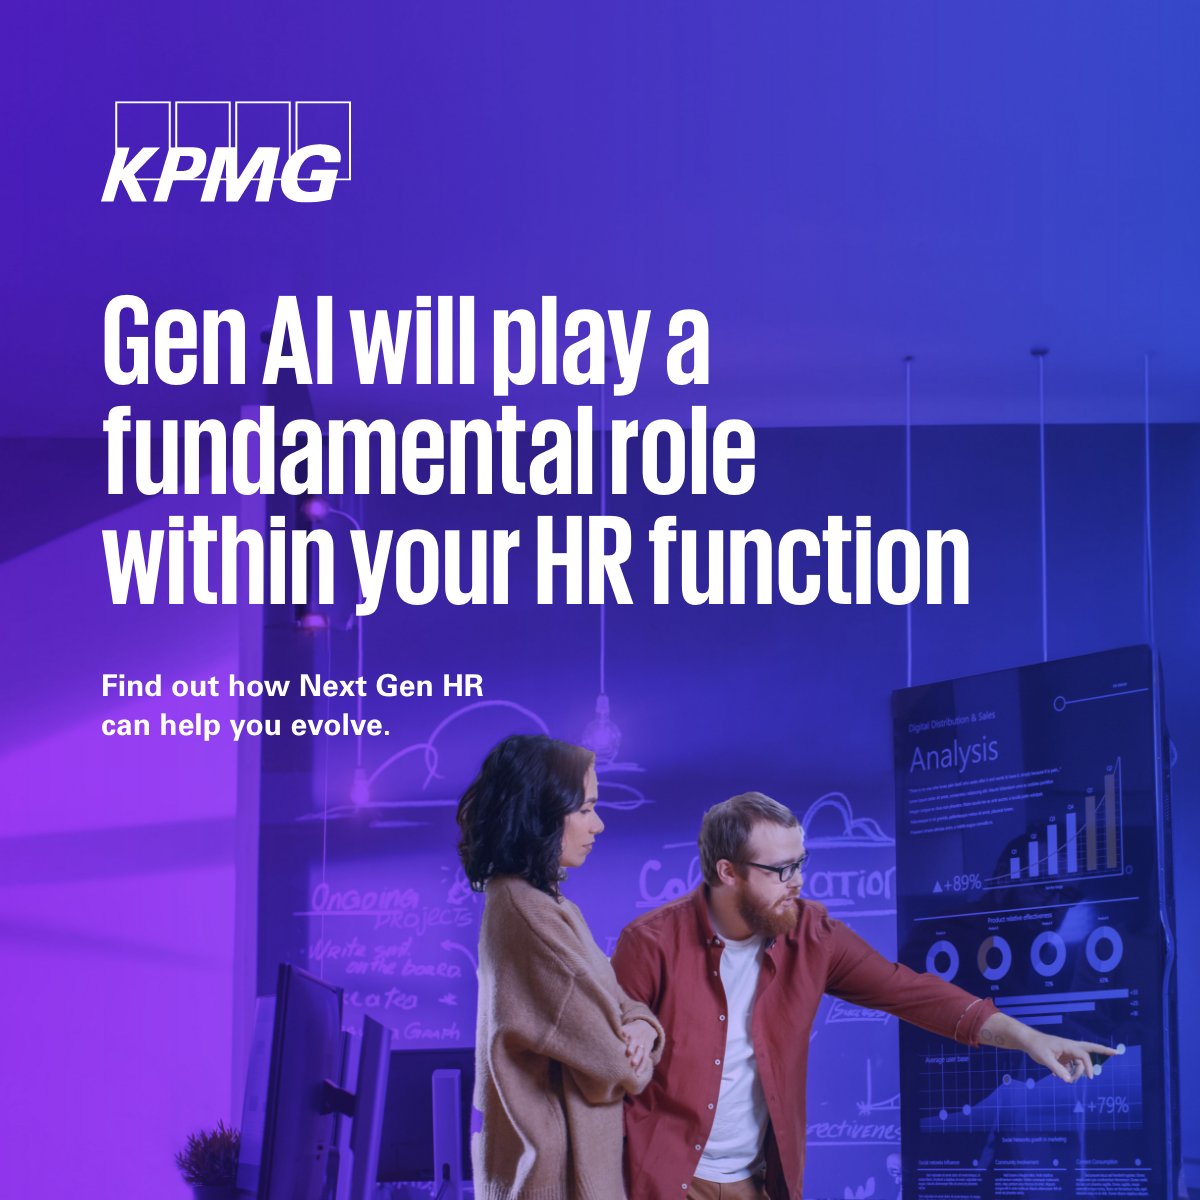 To stay competitive, HR departments must adjust their methods and welcome the inclusion of Generative AI in their operations. By embracing Next Gen HR, organisations can accelerate their evolution and transformation. Find out more:: spkl.io/60174WALh #hrtransformation